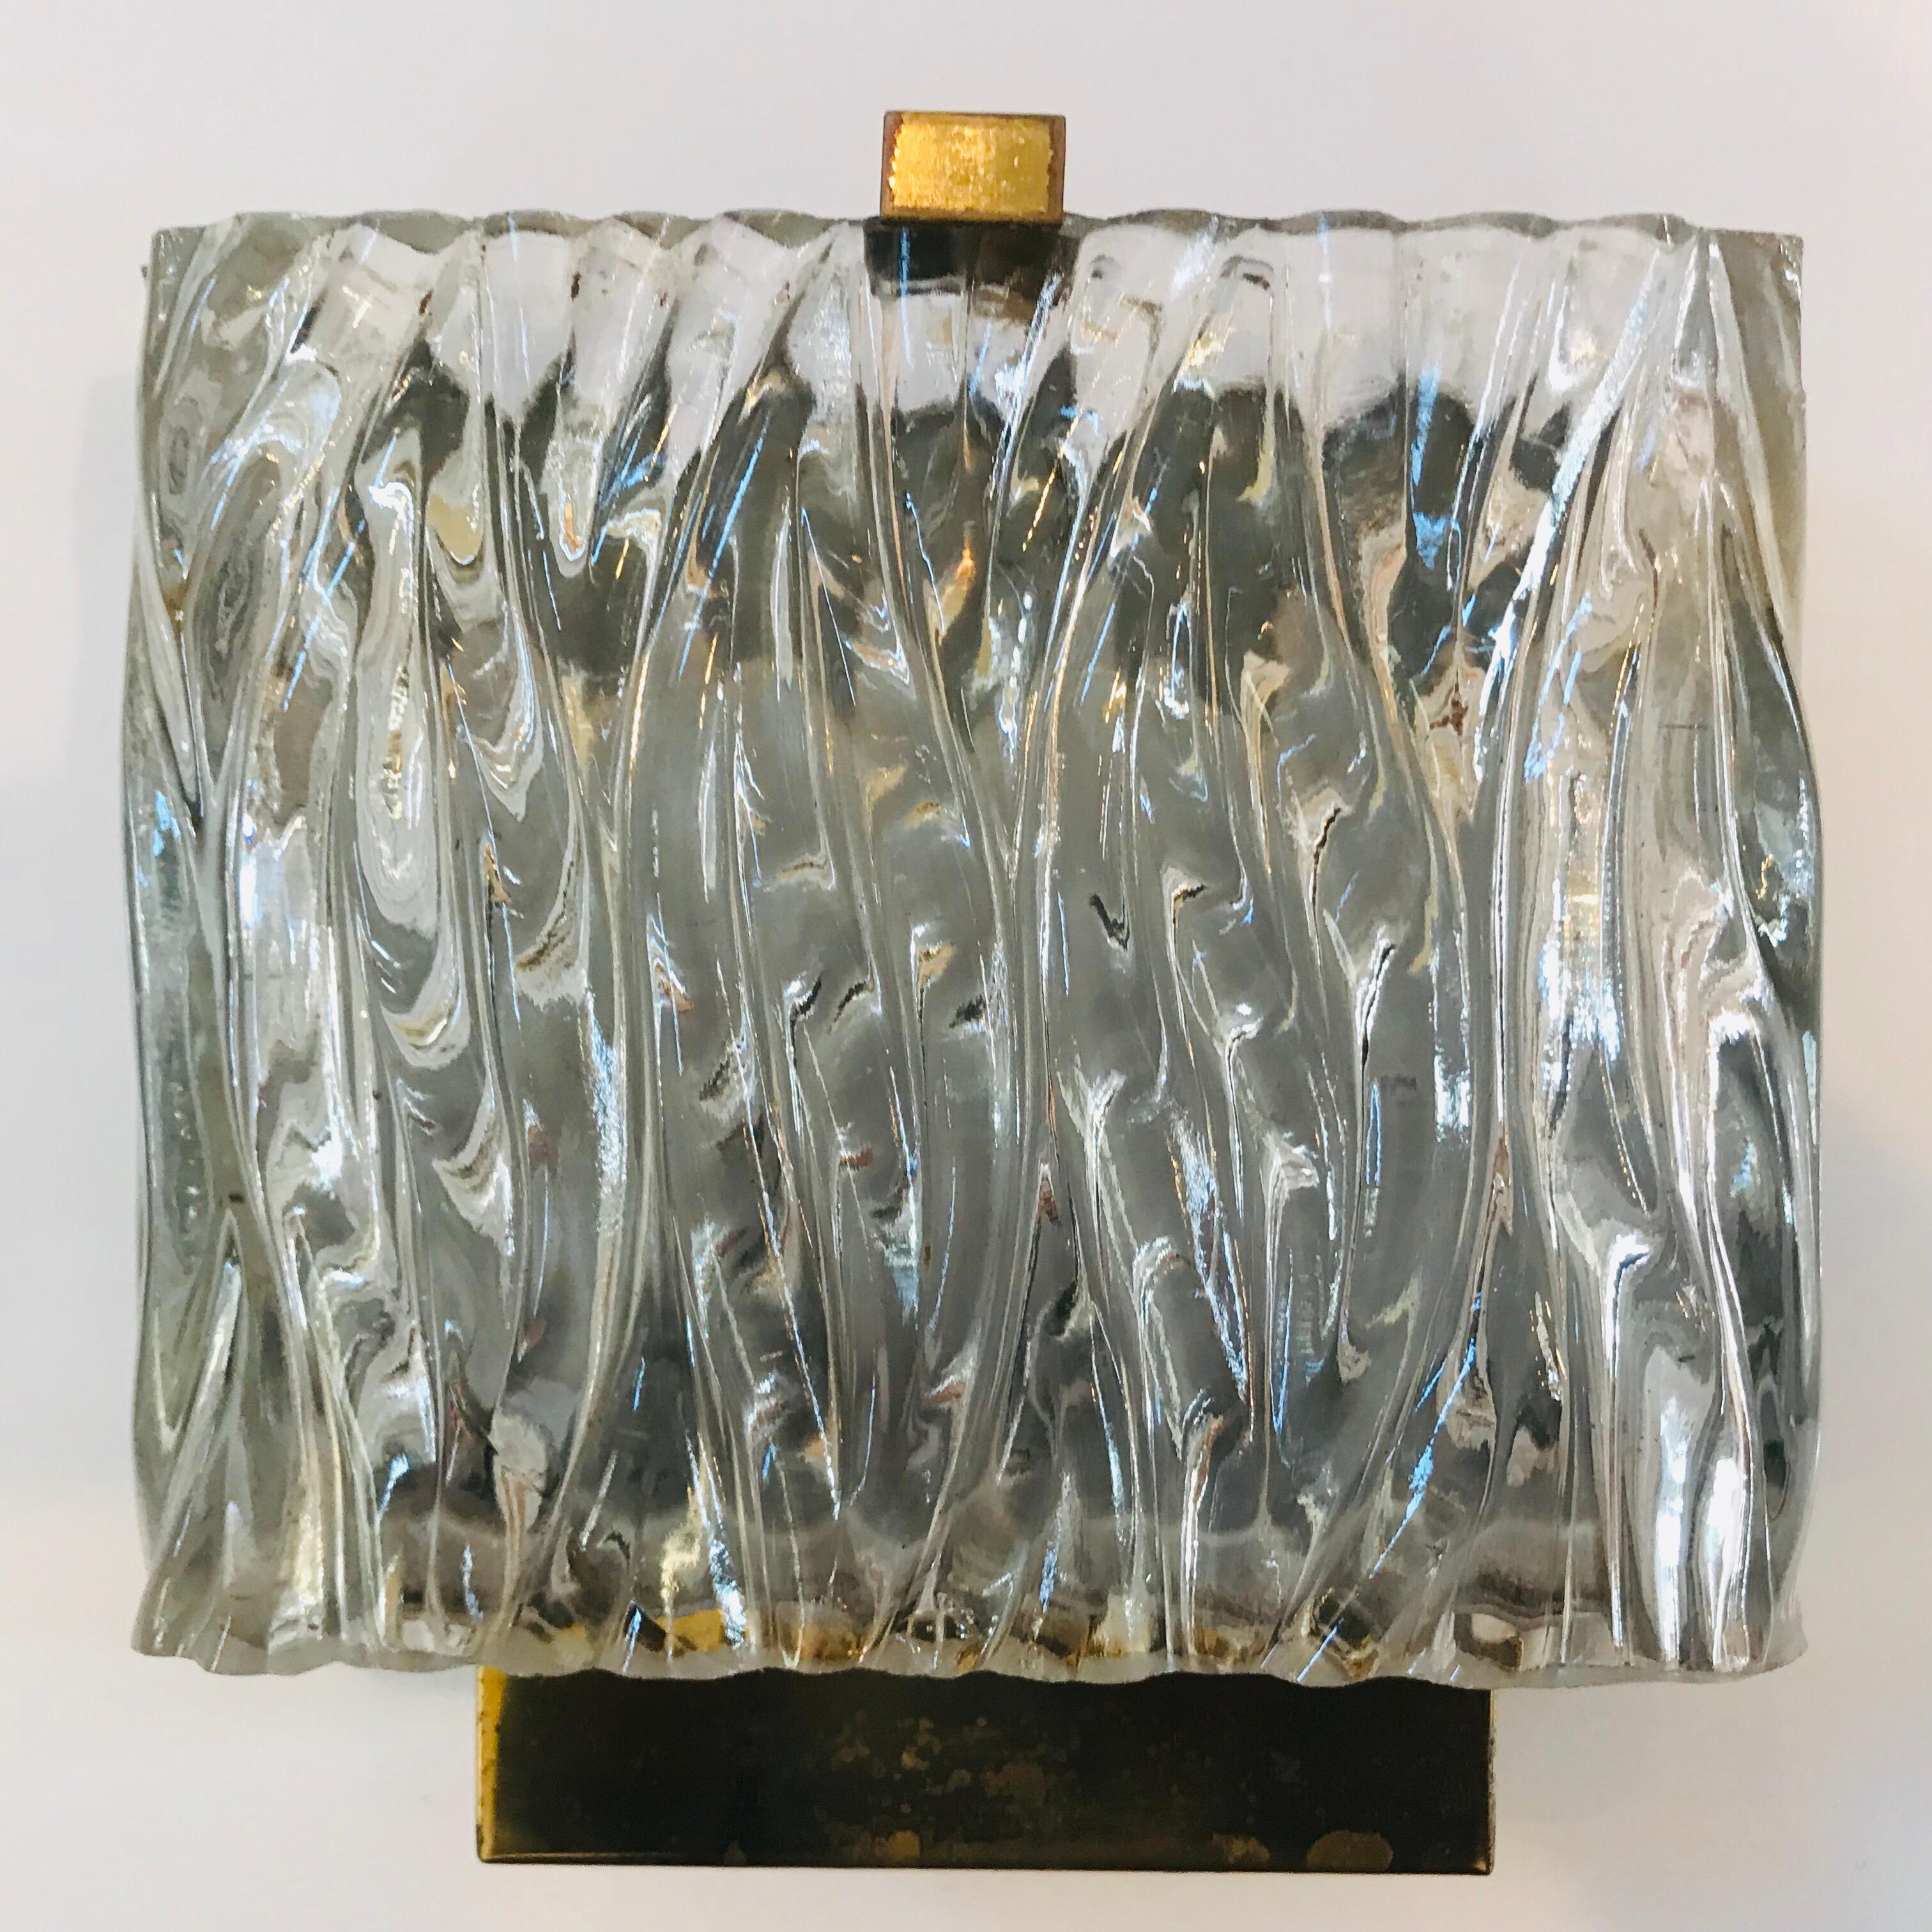 A Maison Arlus French wall light composed of a thick wavy ribbon glass shade and a polished brass frame. Two e12 60w candelabra sockets. Newly Rewired